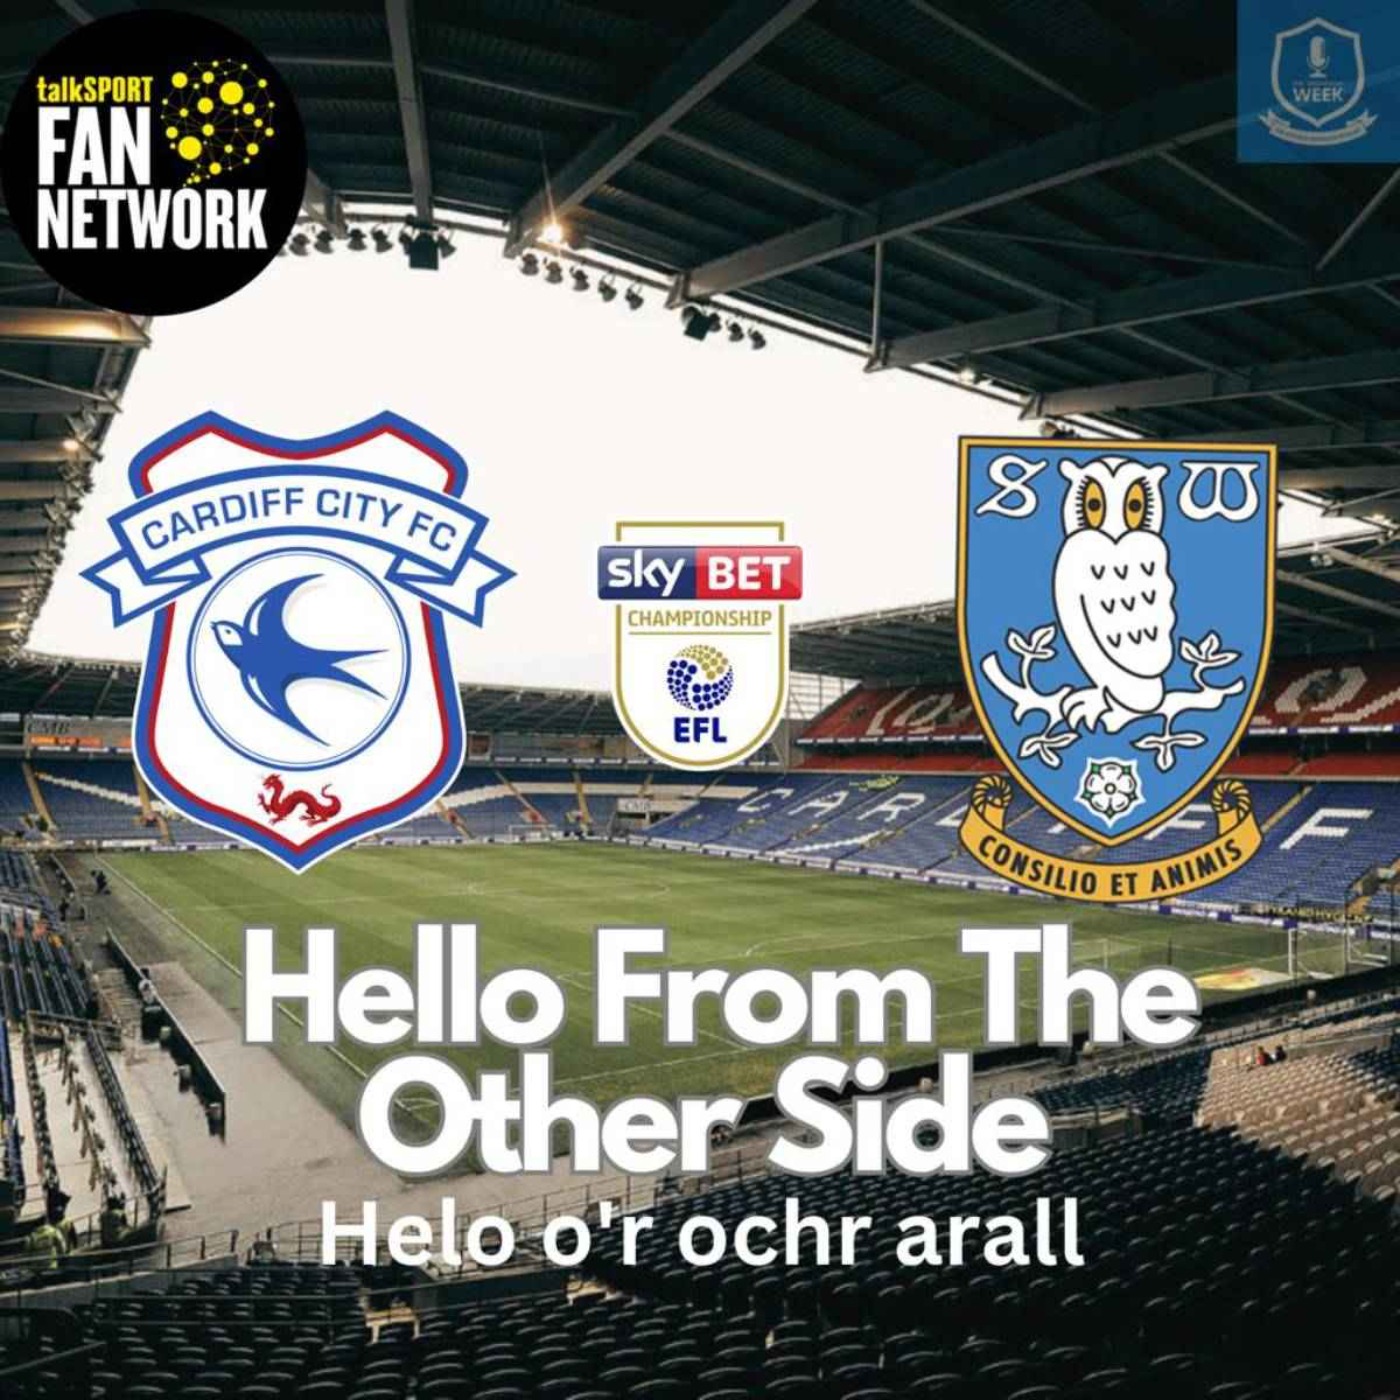 Hello From the Other Side - Cardiff City